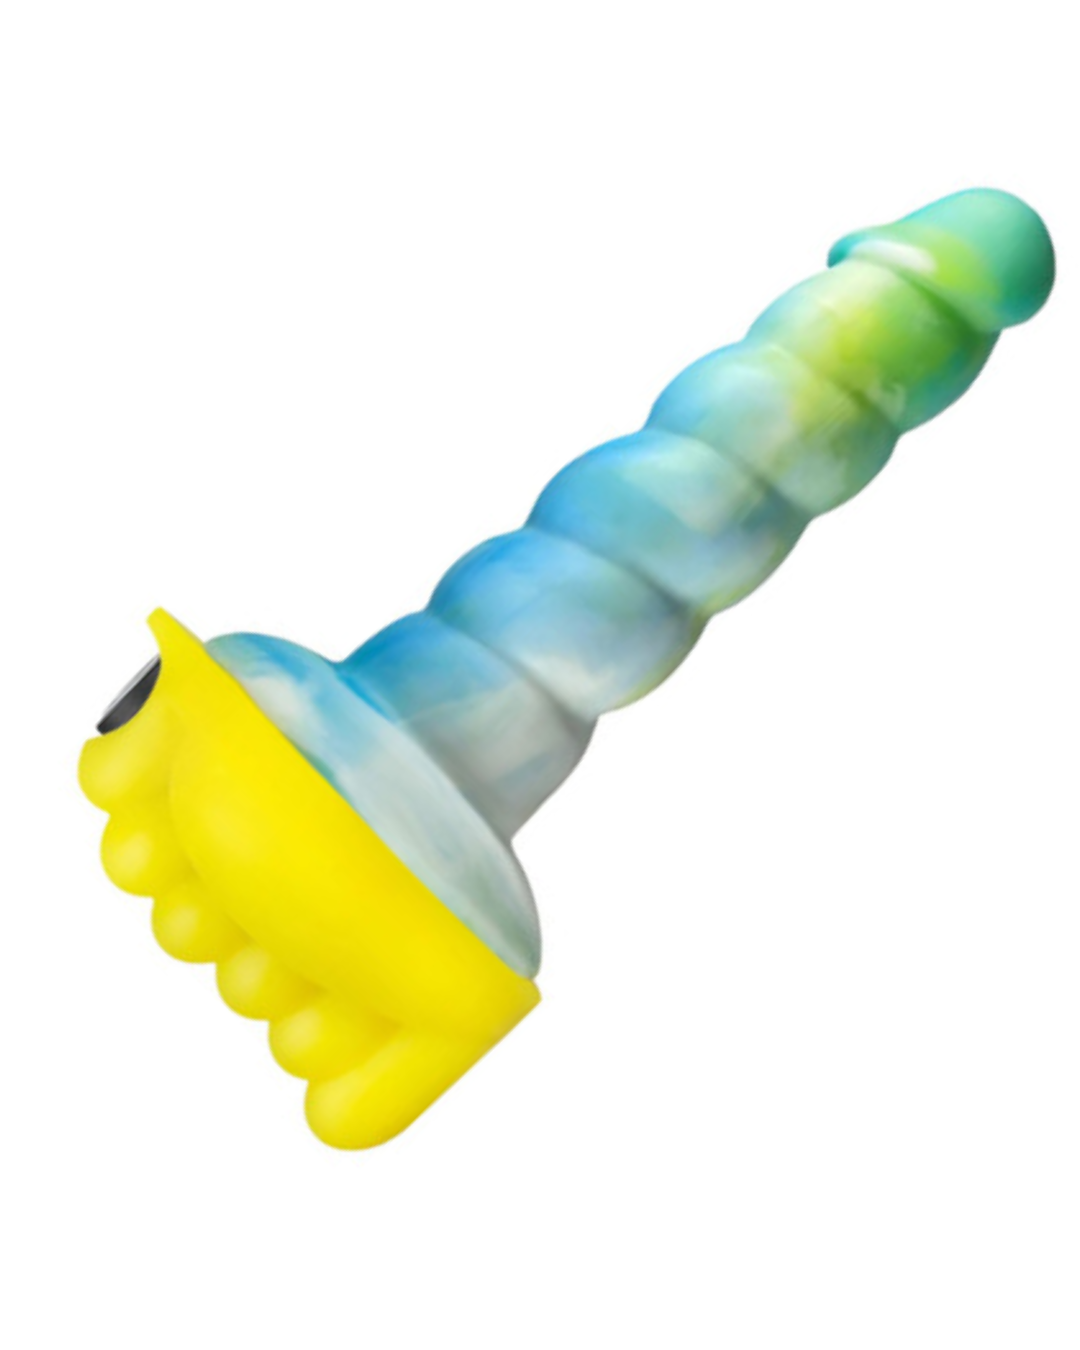 Honeybunch Textured Dildo Base with Vibrator Pocket for Harness Play - Yellow